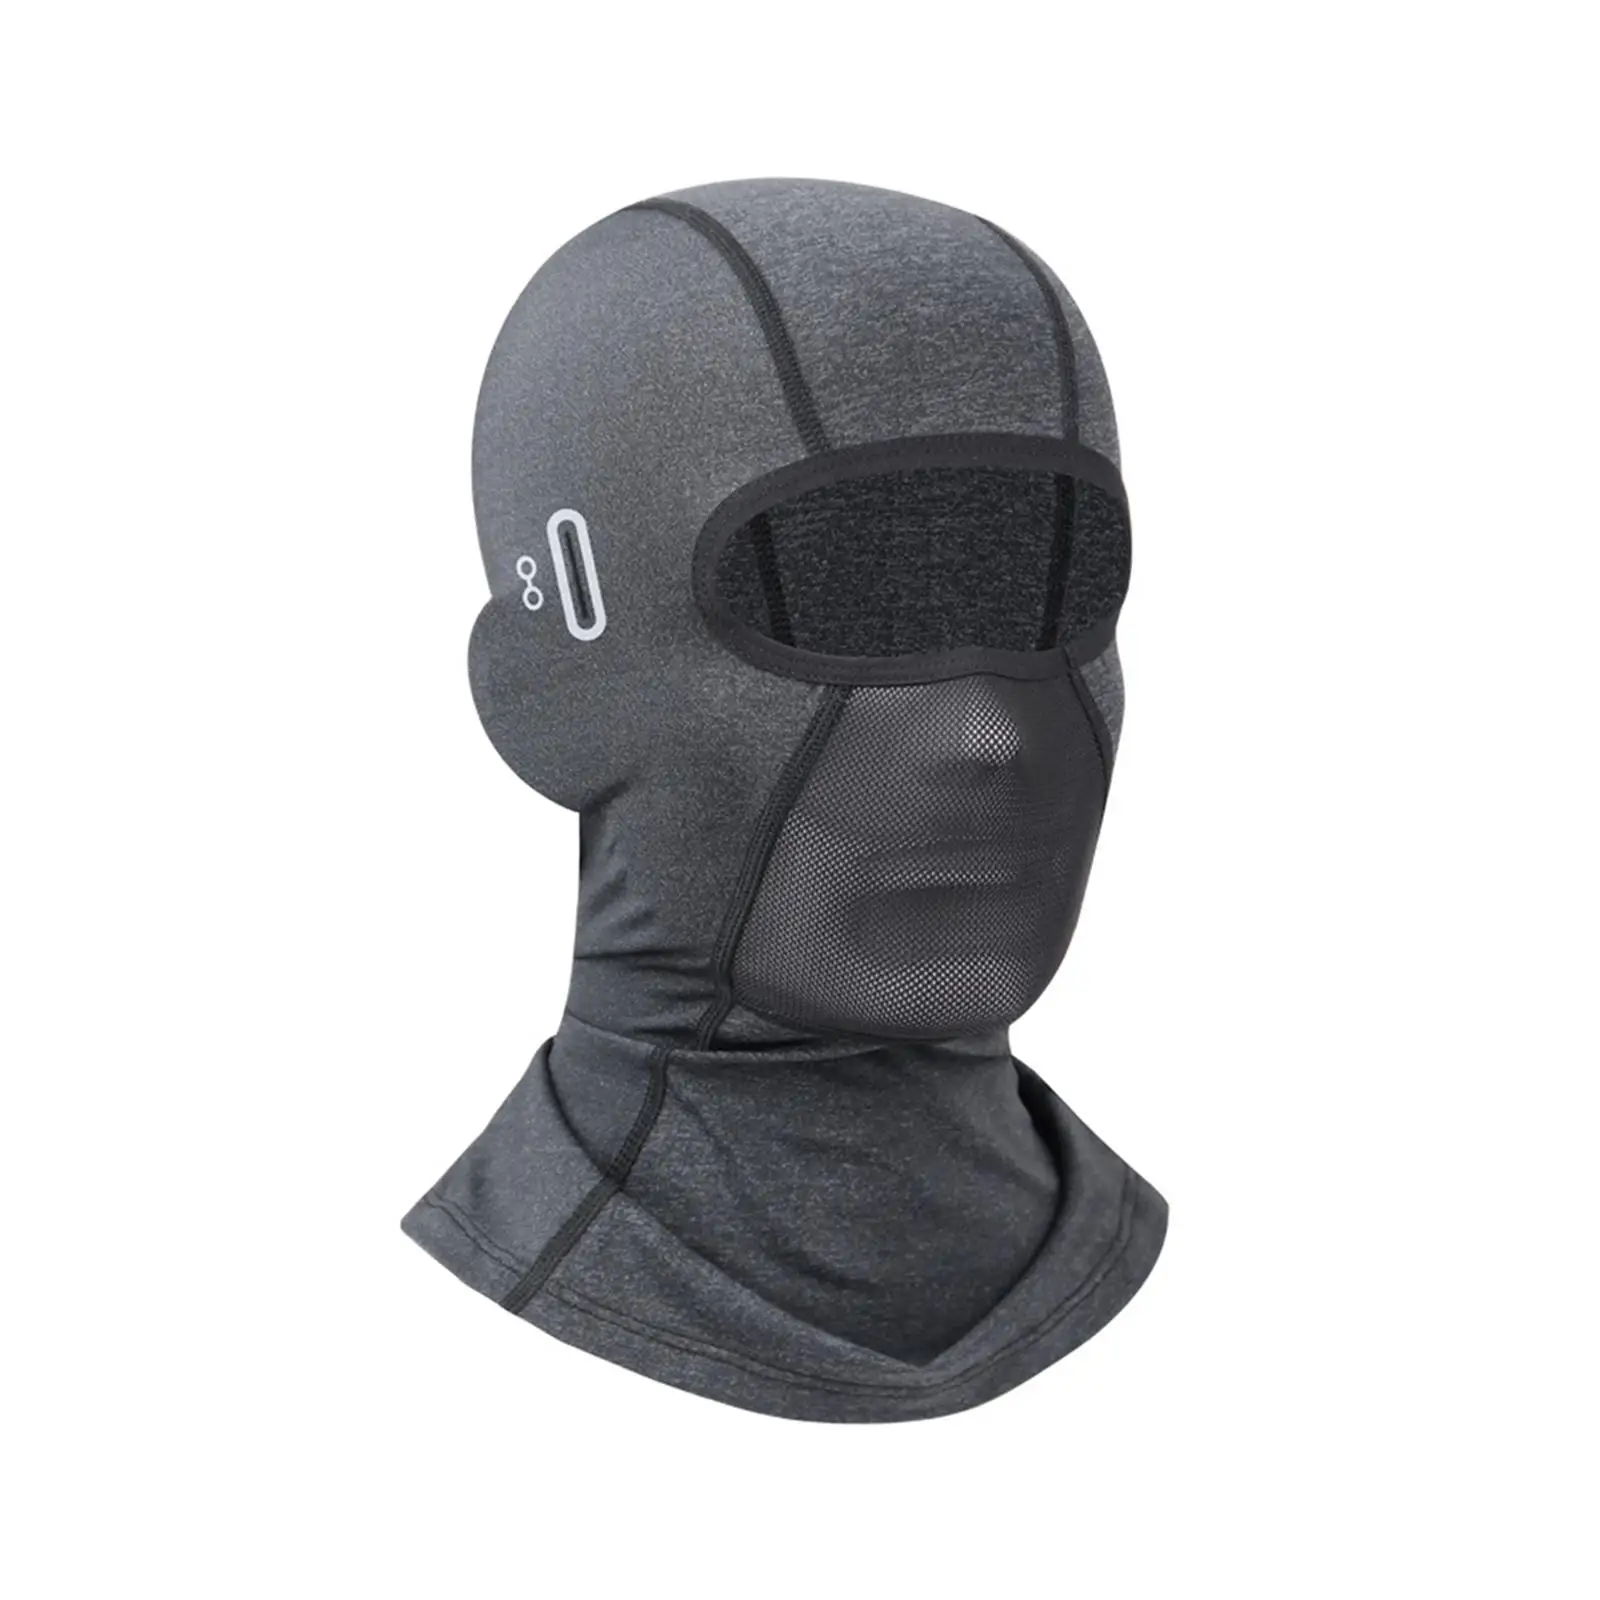 Balaclava Face Mask Summer Windproof Dustproof Full Face Mask Face Cover for Motorcycle Riding for Running Cycling Hiking Ski